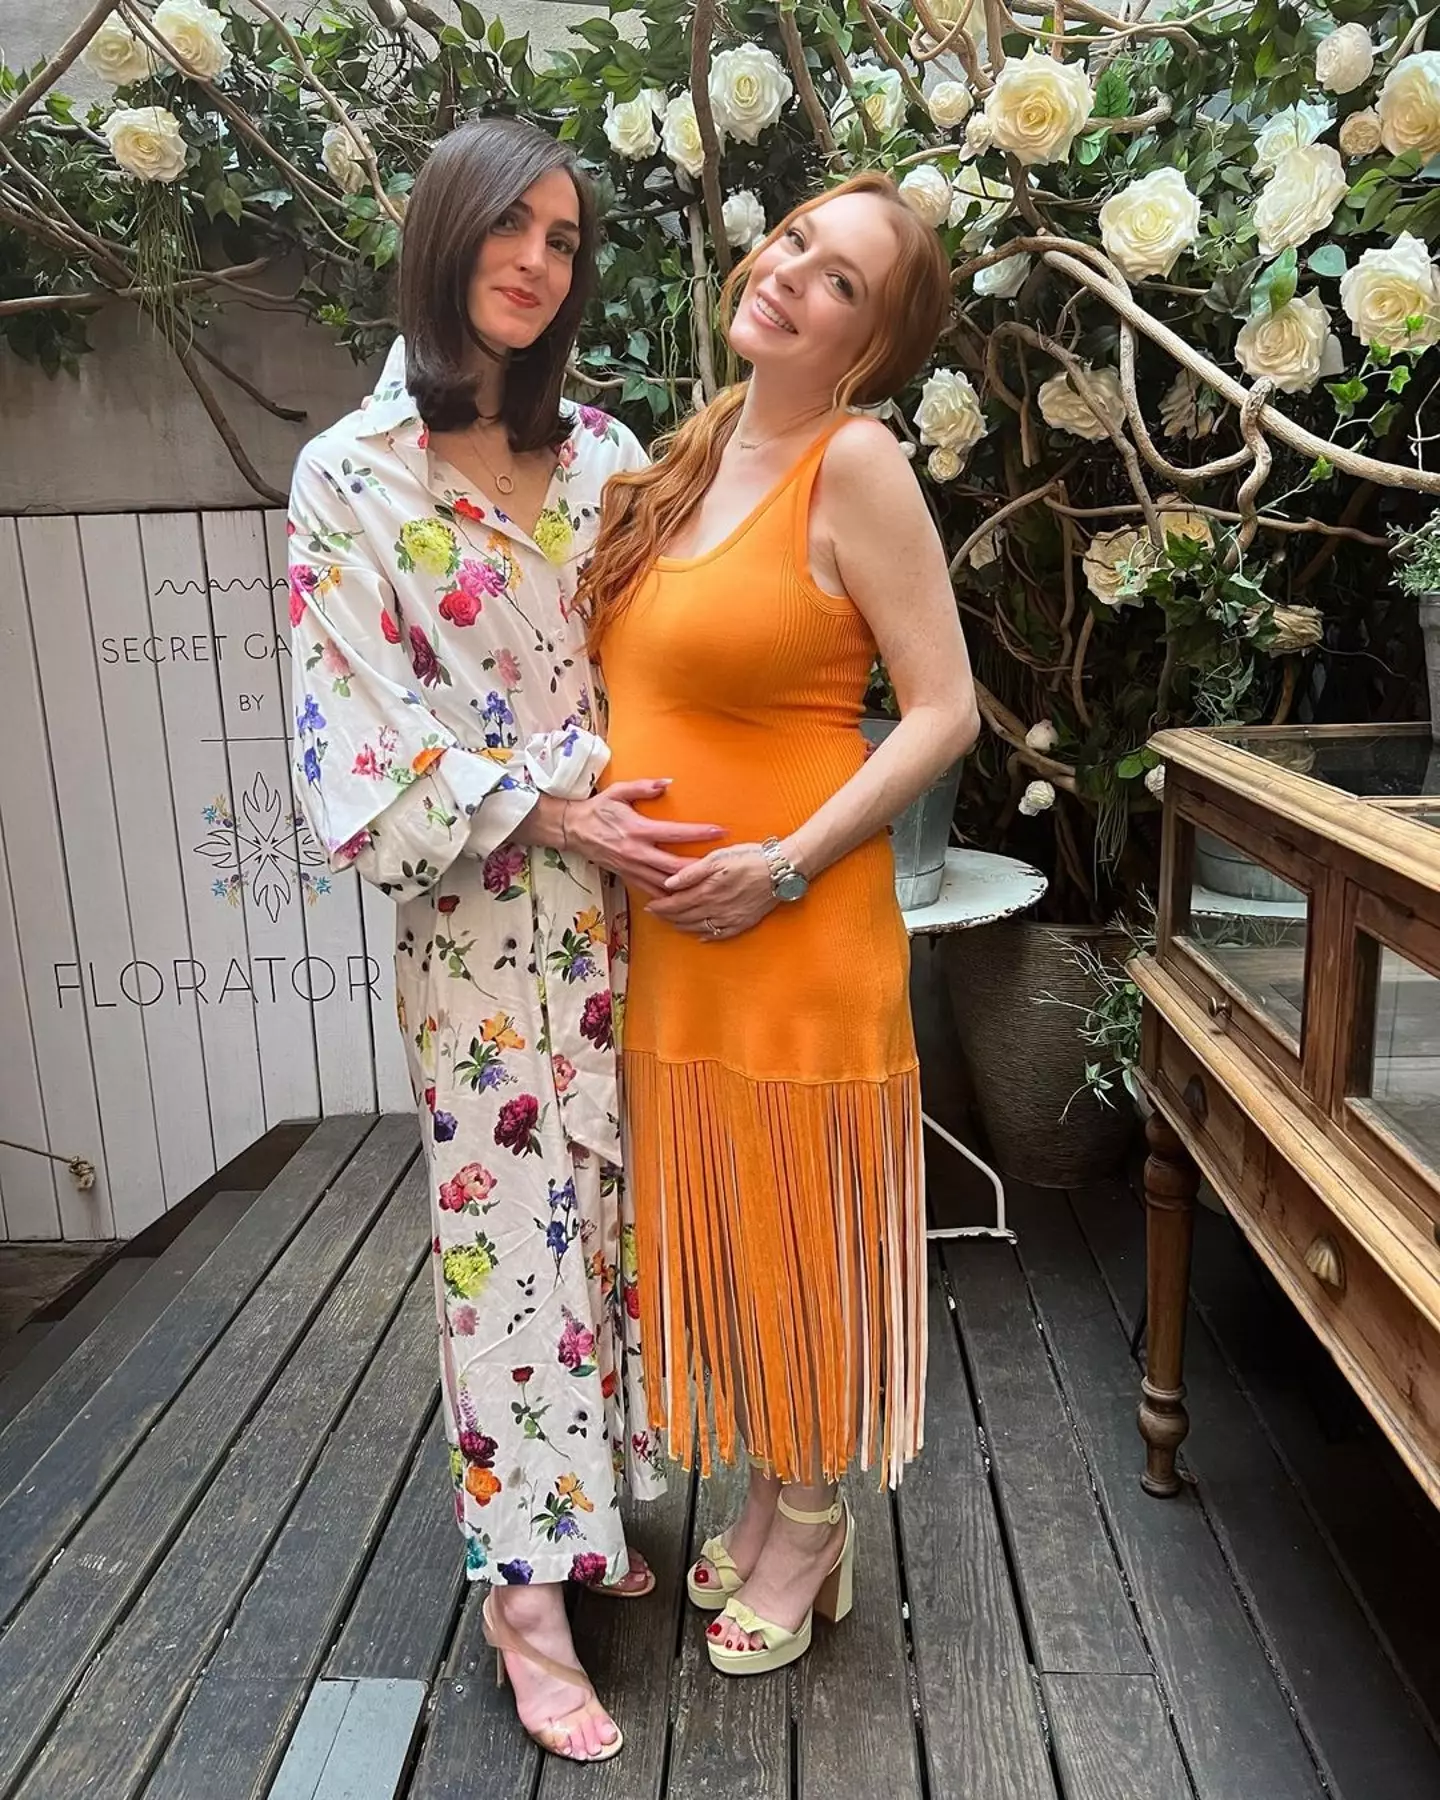 Lindsay Lohan has shared new pictures from her baby shower.